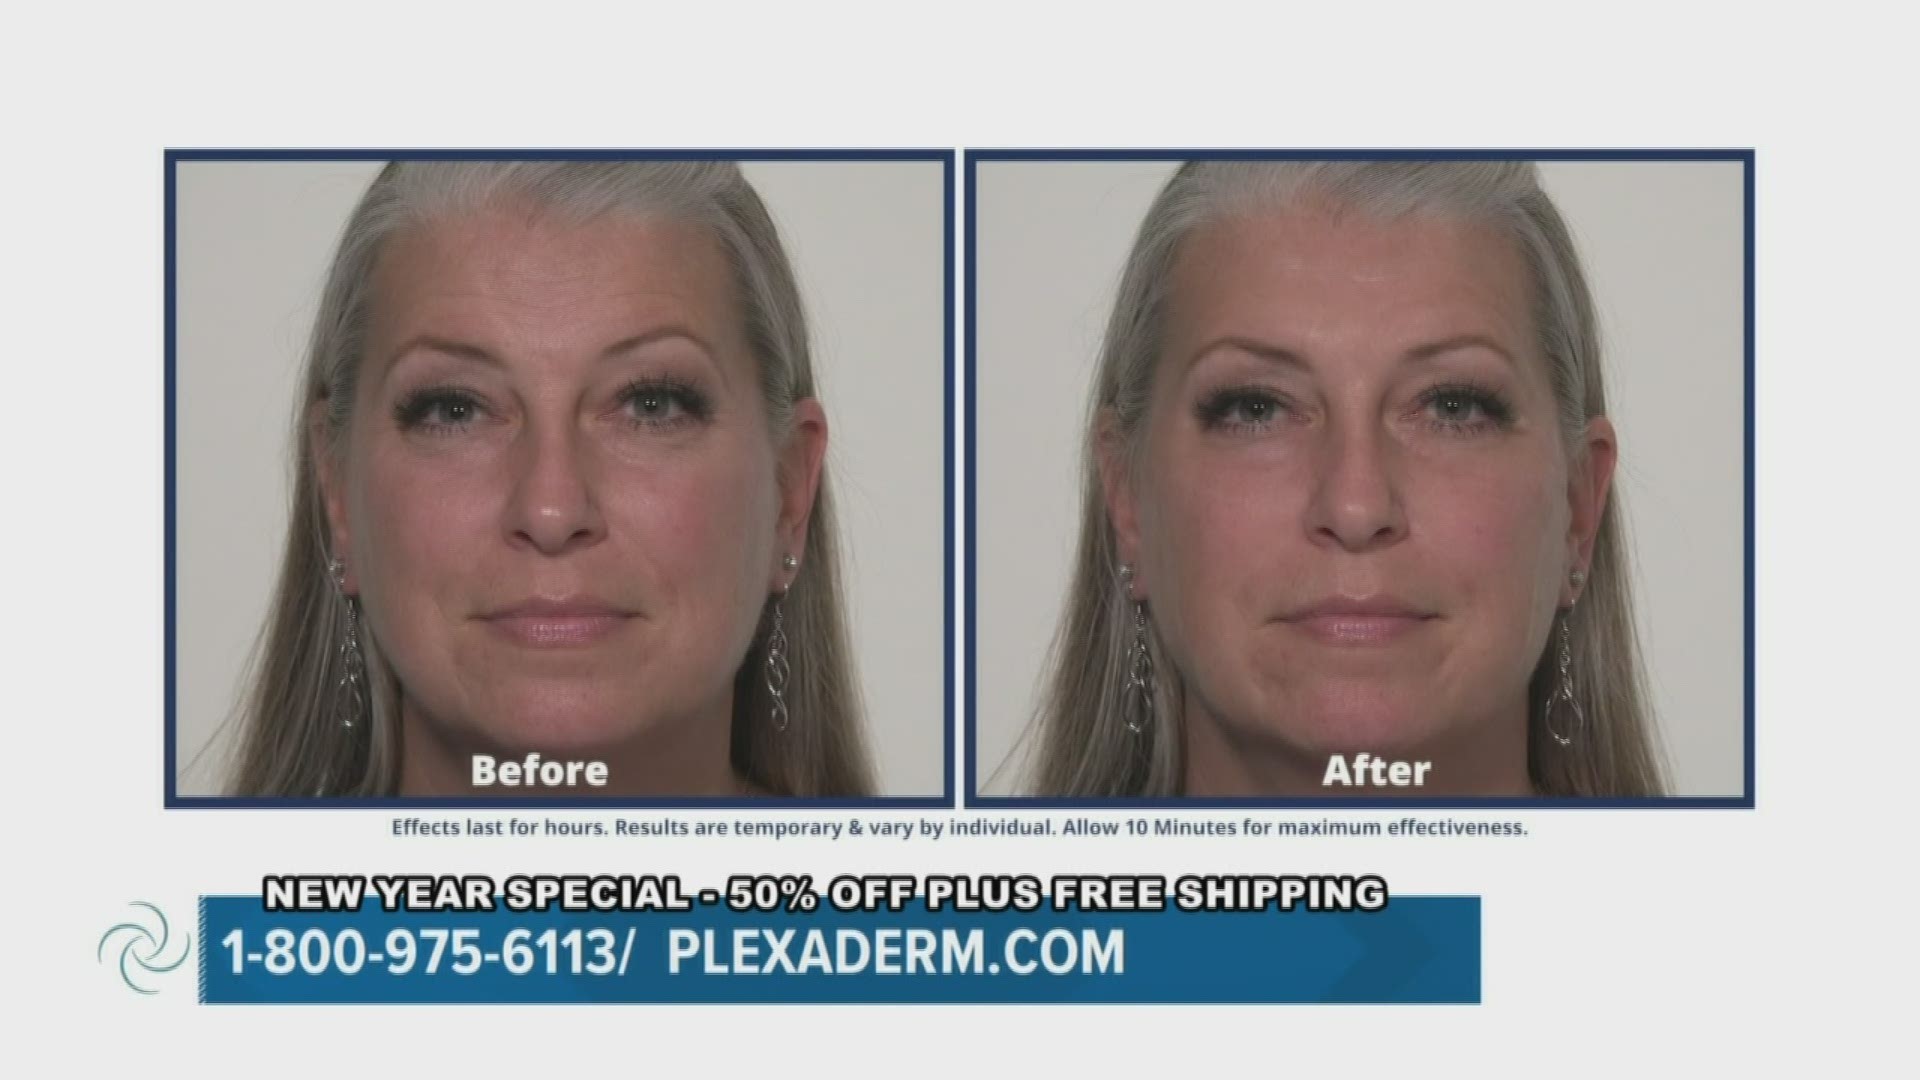 See how Plexaderm can help you look younger.